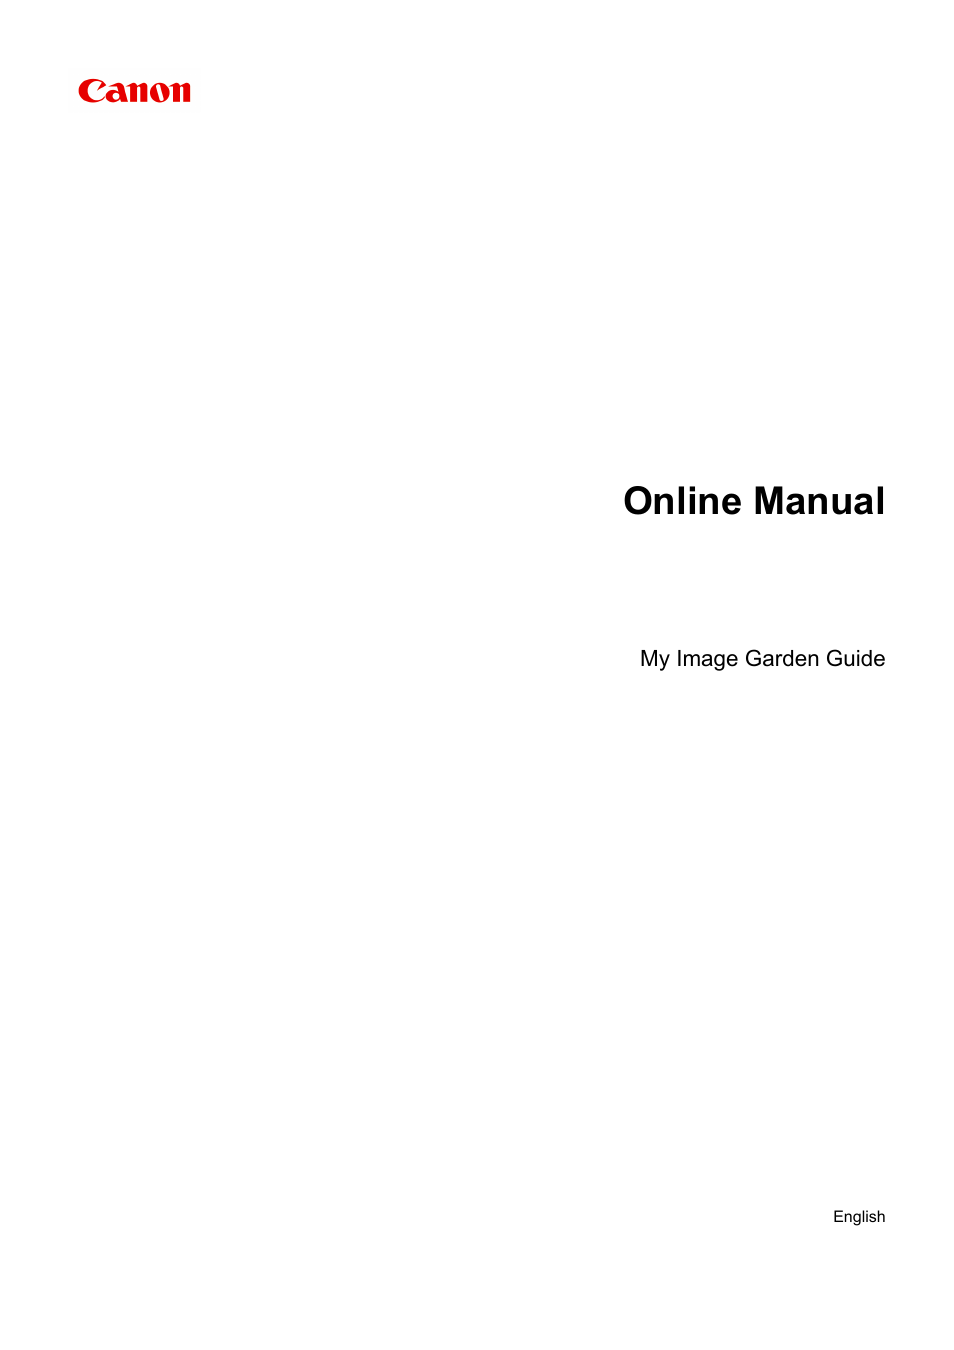 Canon PIXMA MG2440 User Manual | 335 pages | Original mode | Also for